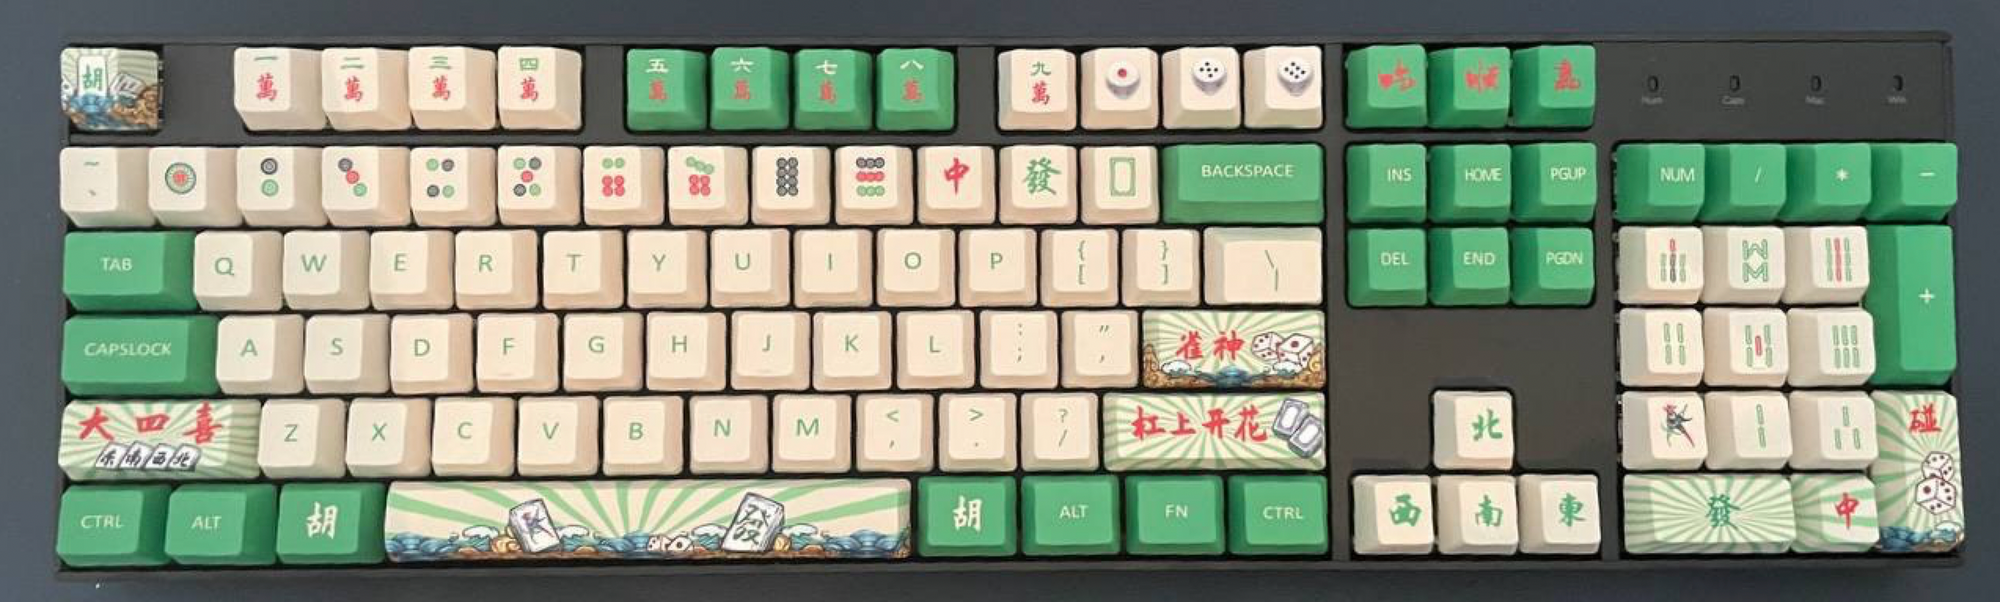 A full keyboard with number pads at the side, and many mahjong themed keycaps mirroring the playing cards